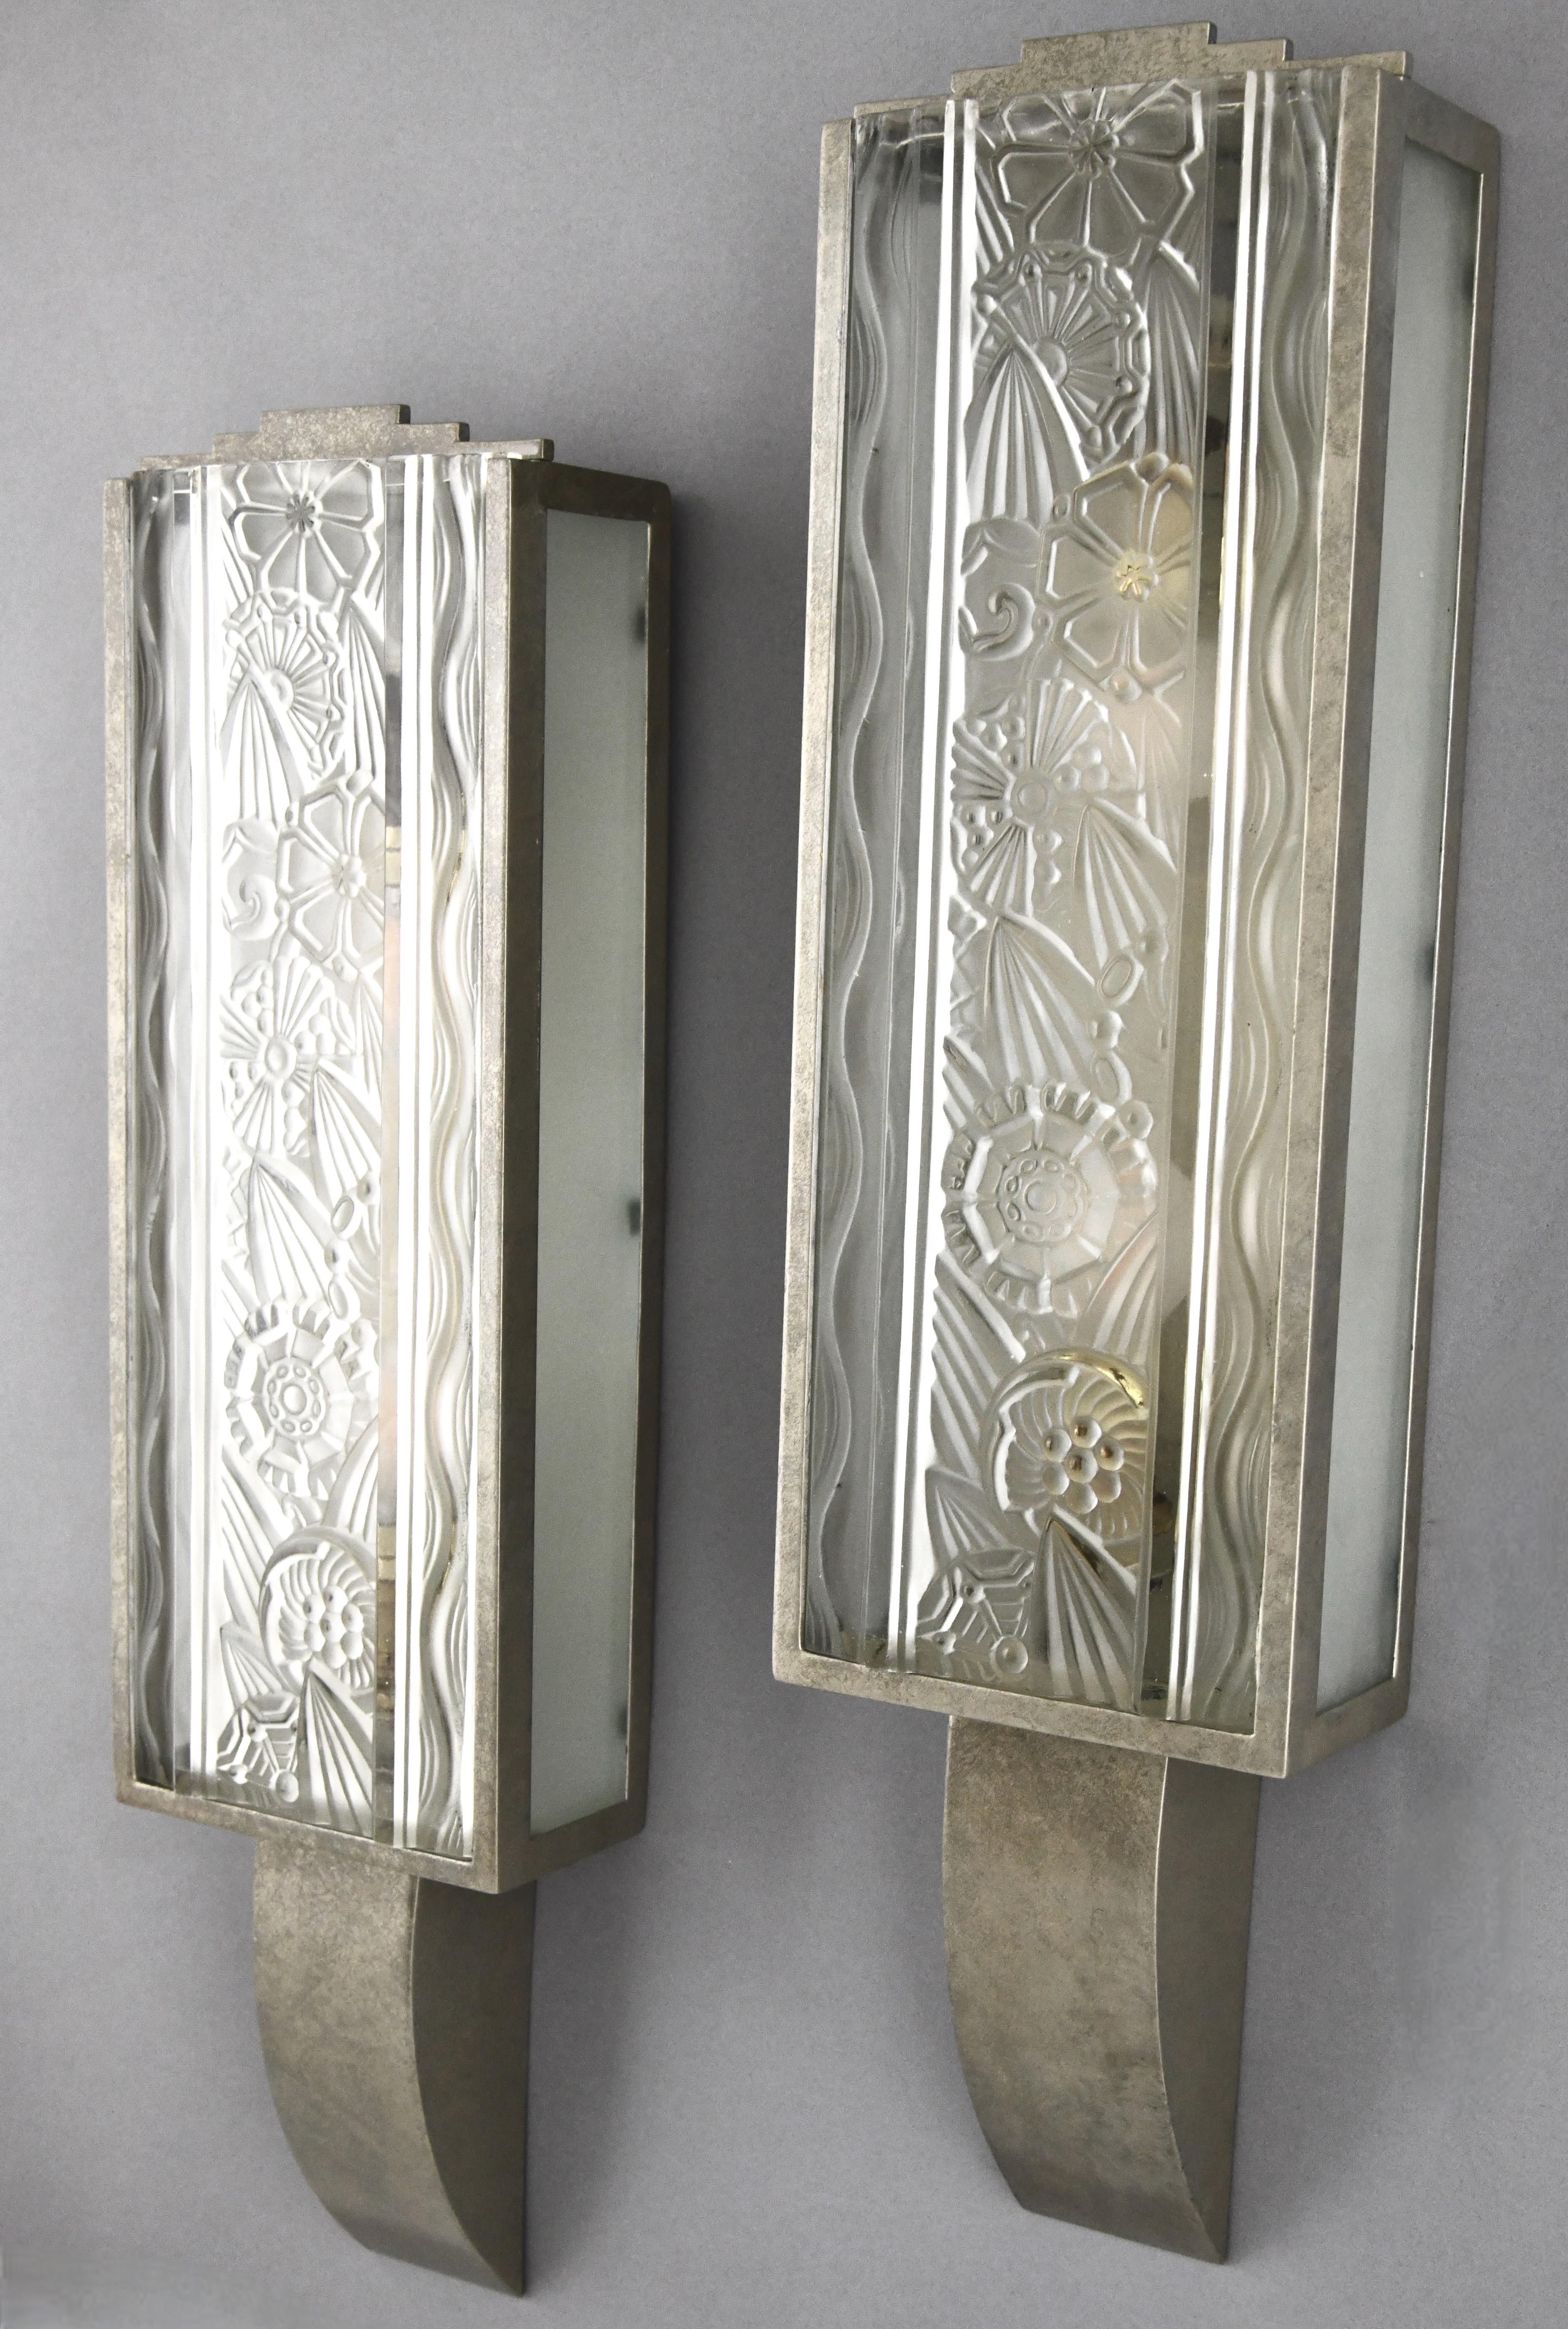 Early 20th Century Pair of Art Deco wall lights or sconces signed by Hettier & Vincent 1925